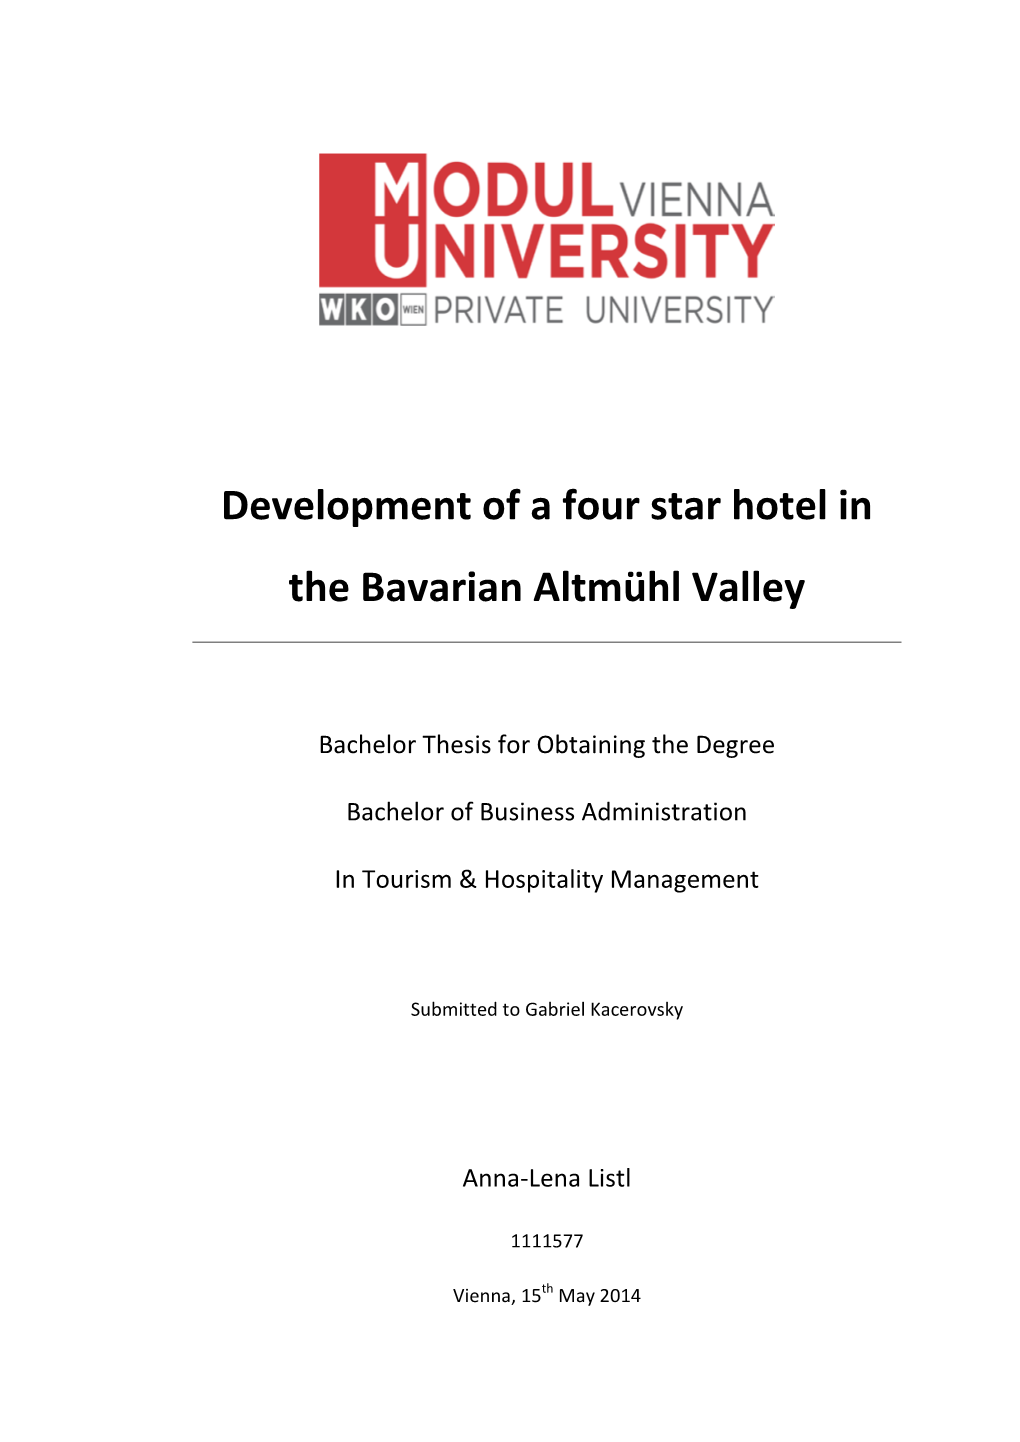 Development of a Four Star Hotel in the Bavarian Altmühl Valley